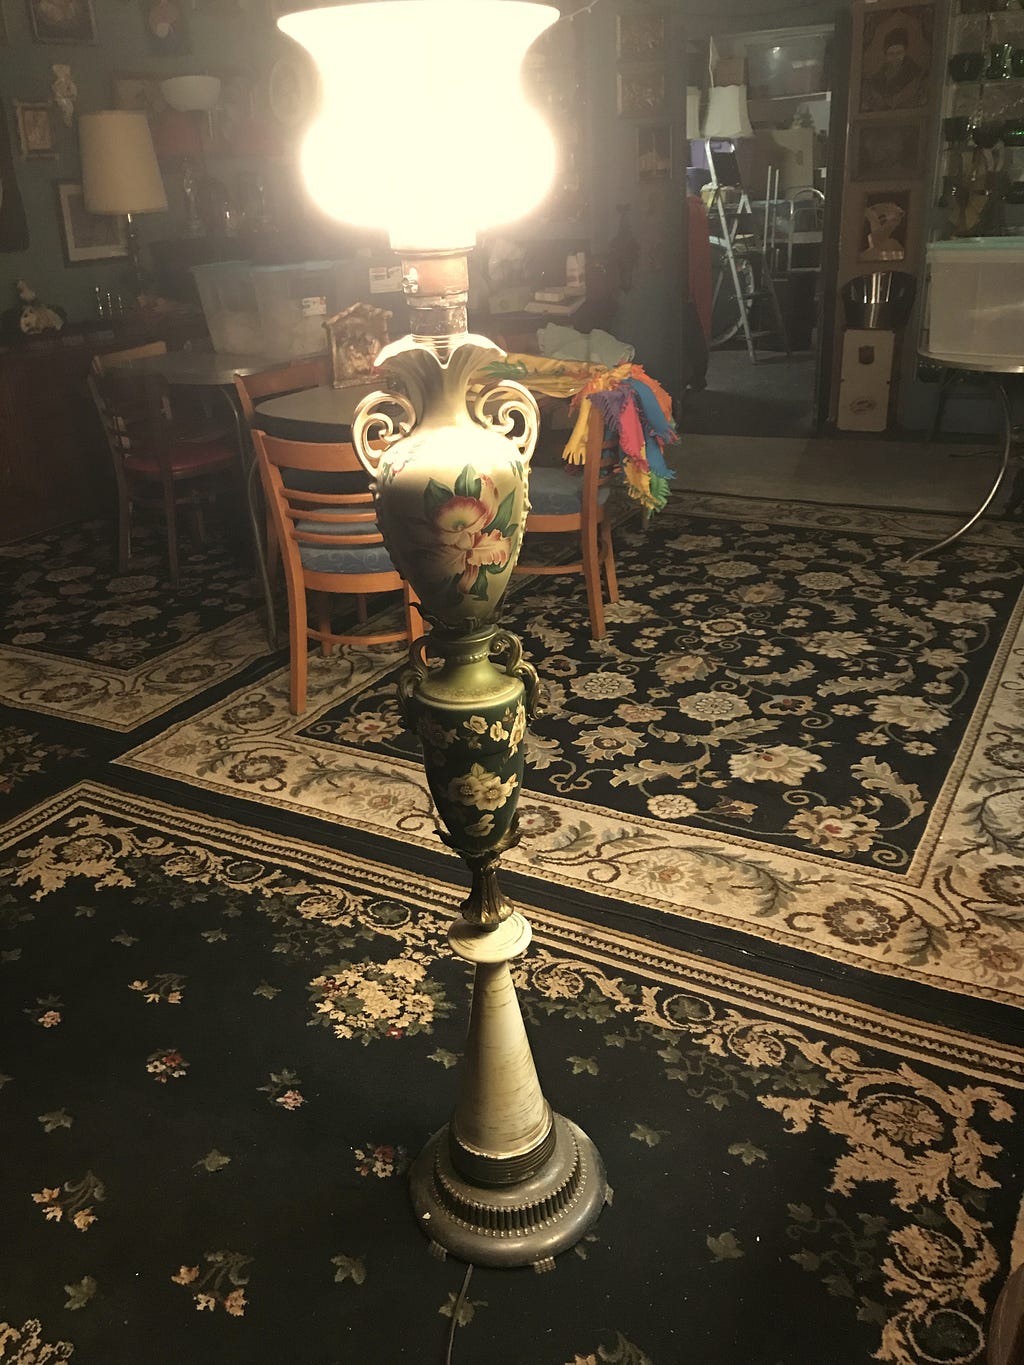 A torchier a Made from various unsold lamps that stacked together